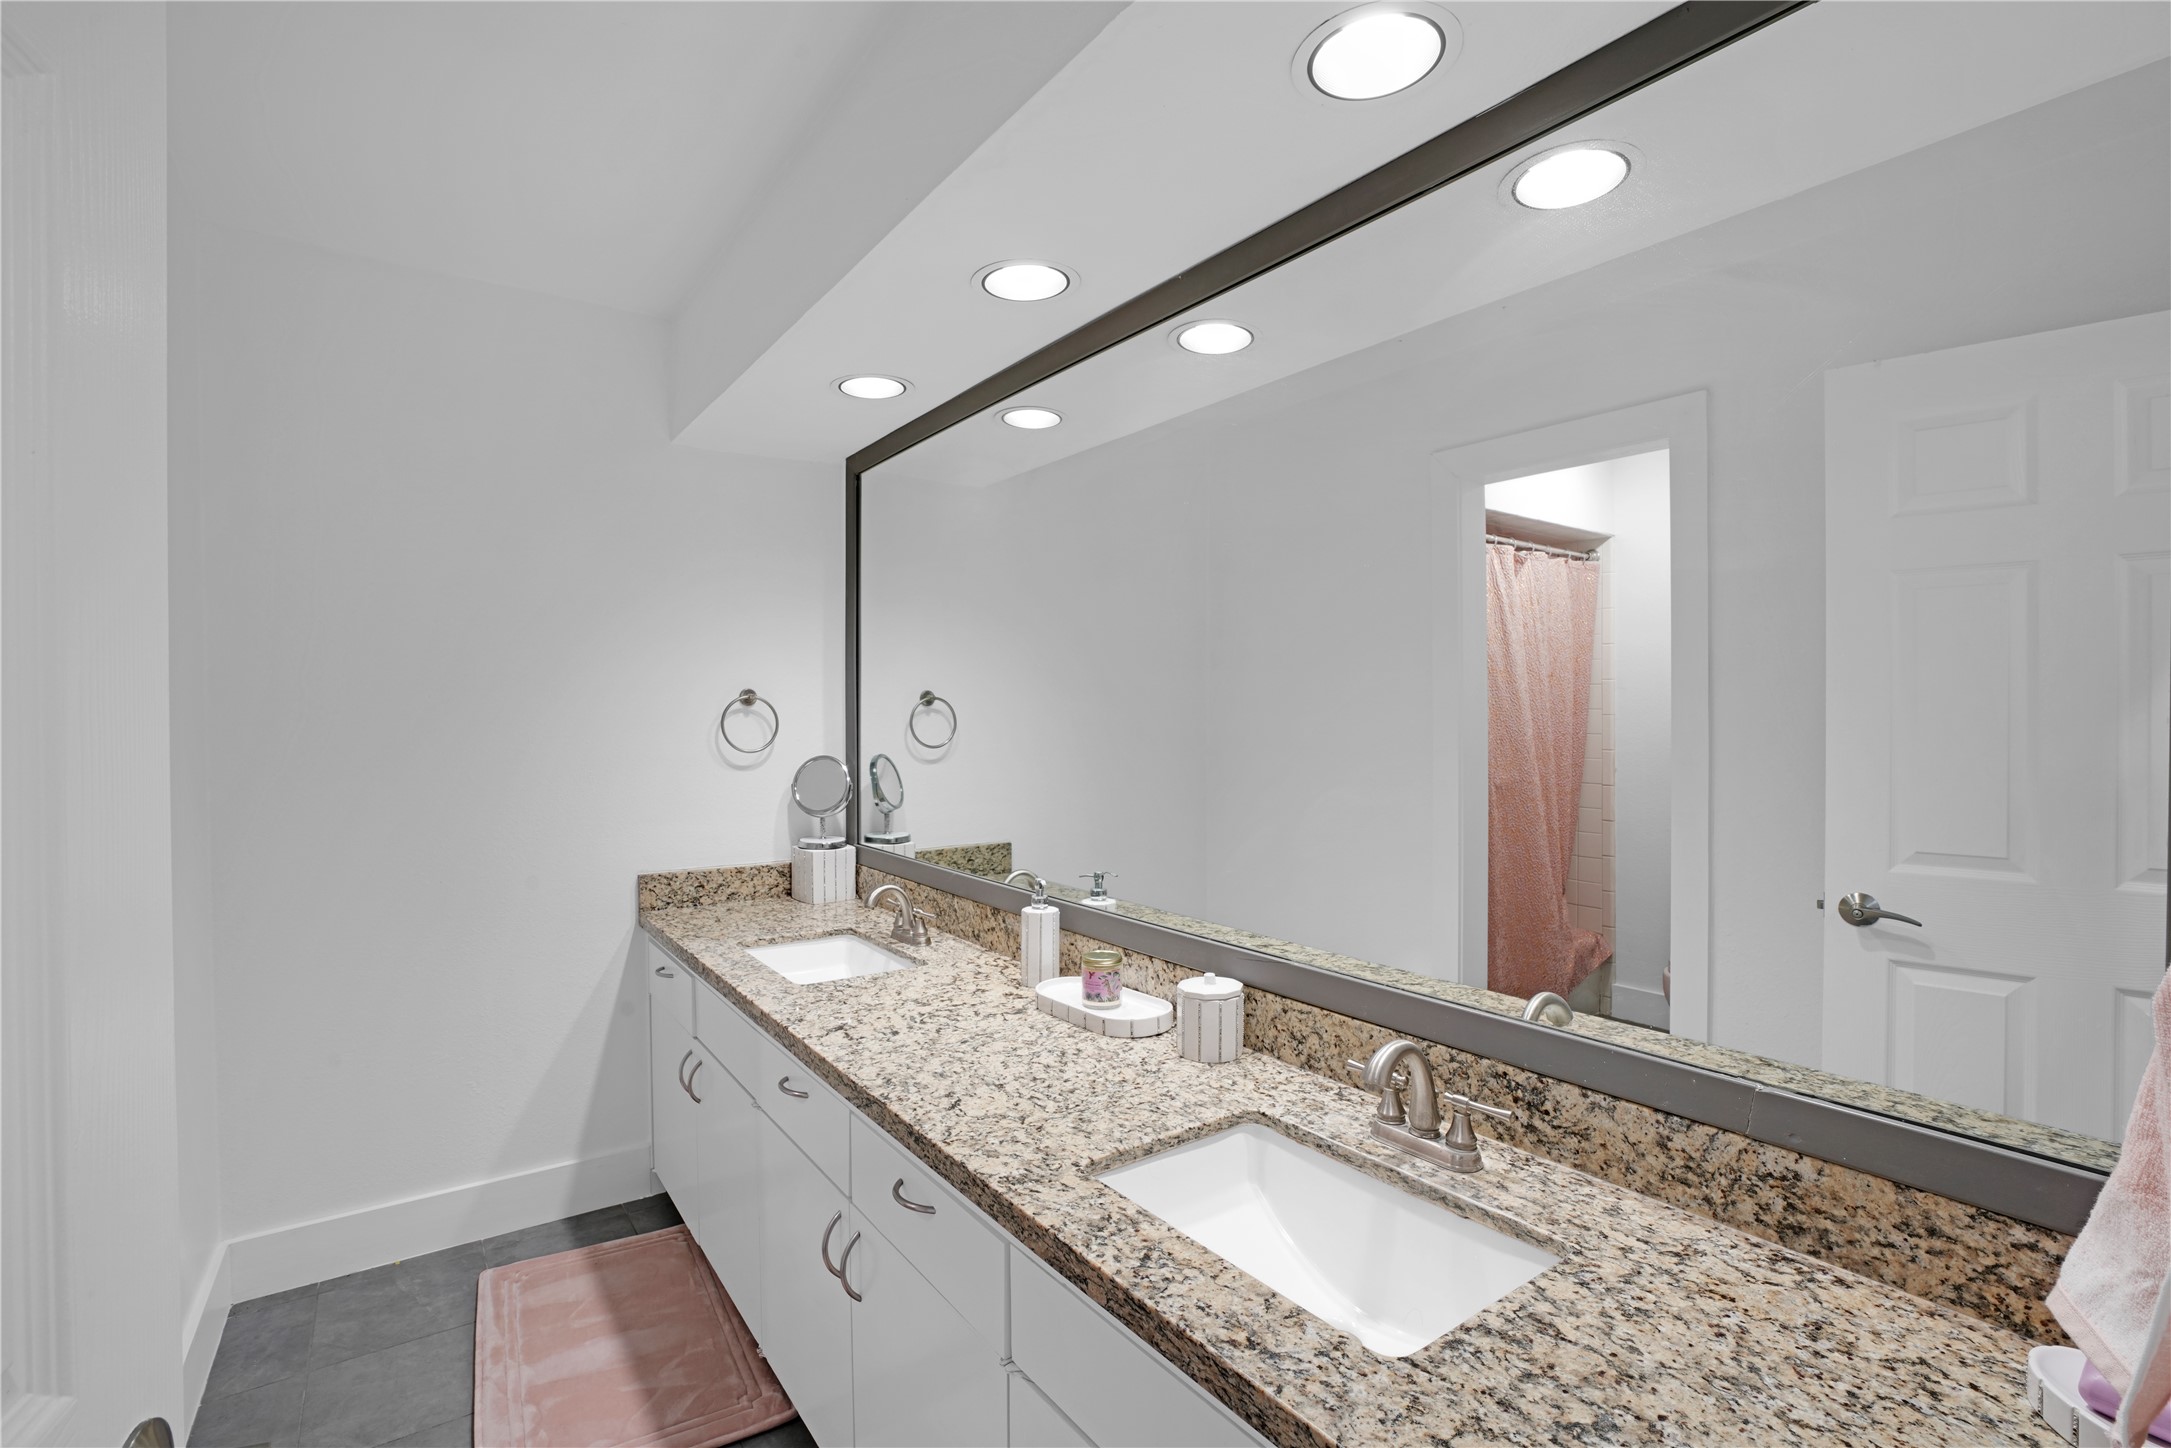 Secondary bathroom upstairs with dual vanities and shower/tub combo. All new lighting throughout the house!